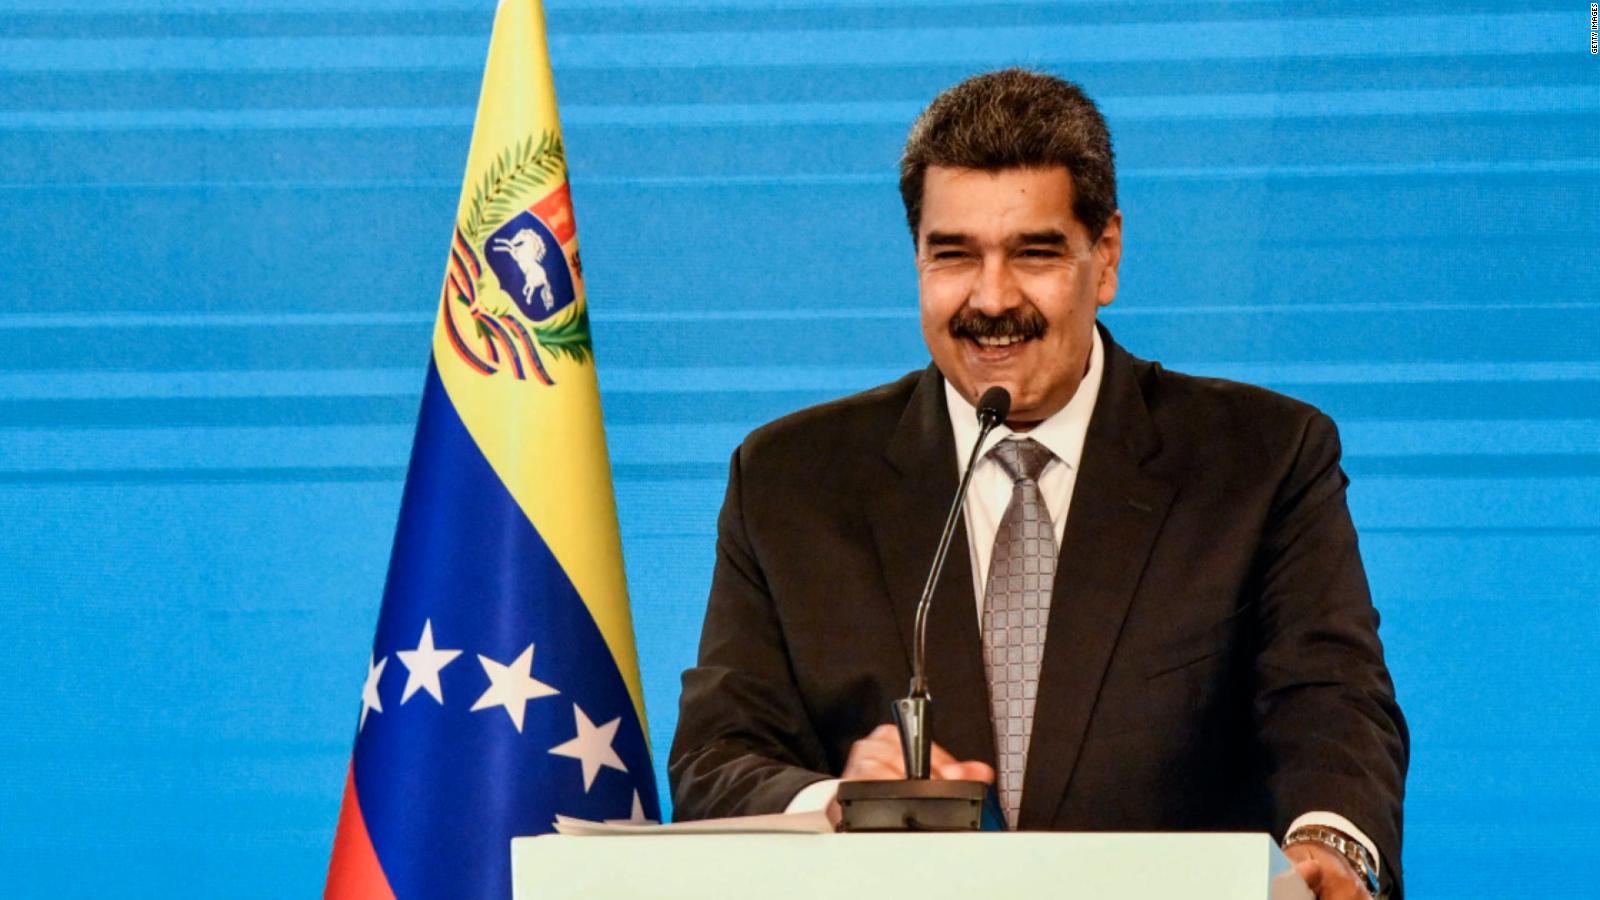 The United States will not invite the Maduro government to the Summit of the Americas